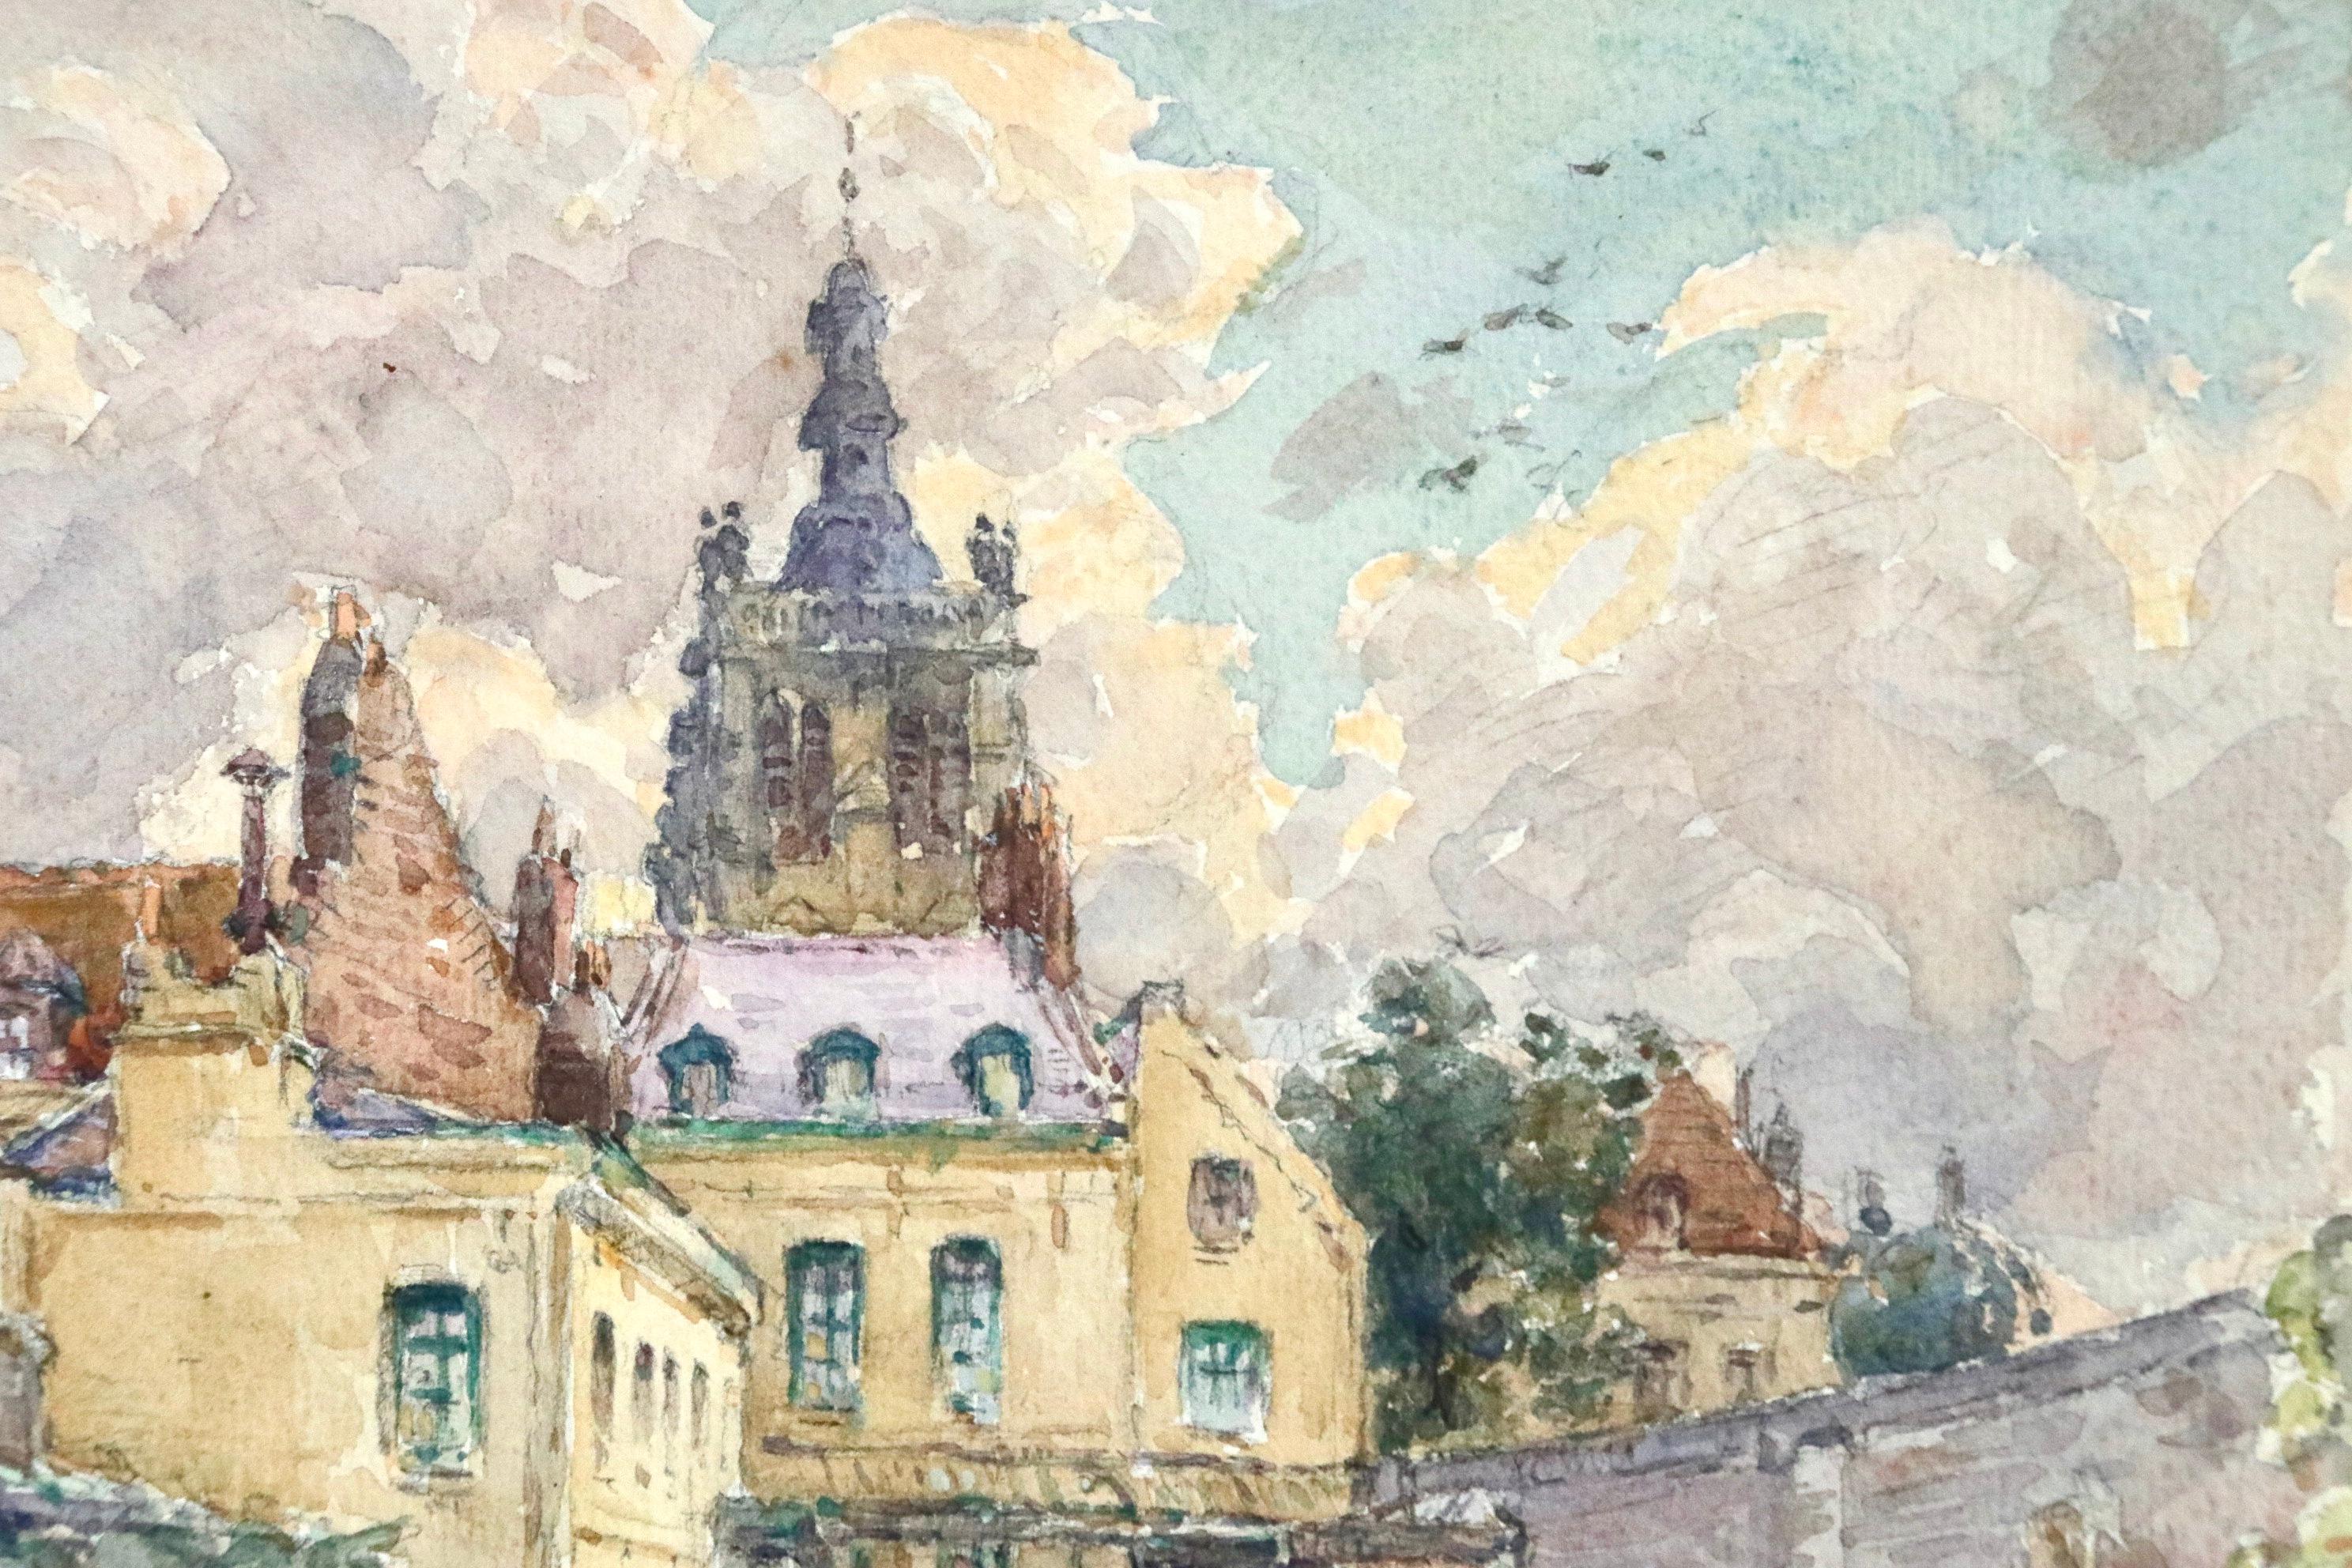 A simply stunning watercolour on paper circa 1910 by Henri Duhem. The painting depicts the house and gardens of the painter's uncle, Achille Dincq, an industrialist. The house is located in Douai with the tower of L'église de Saint Pierre visible in